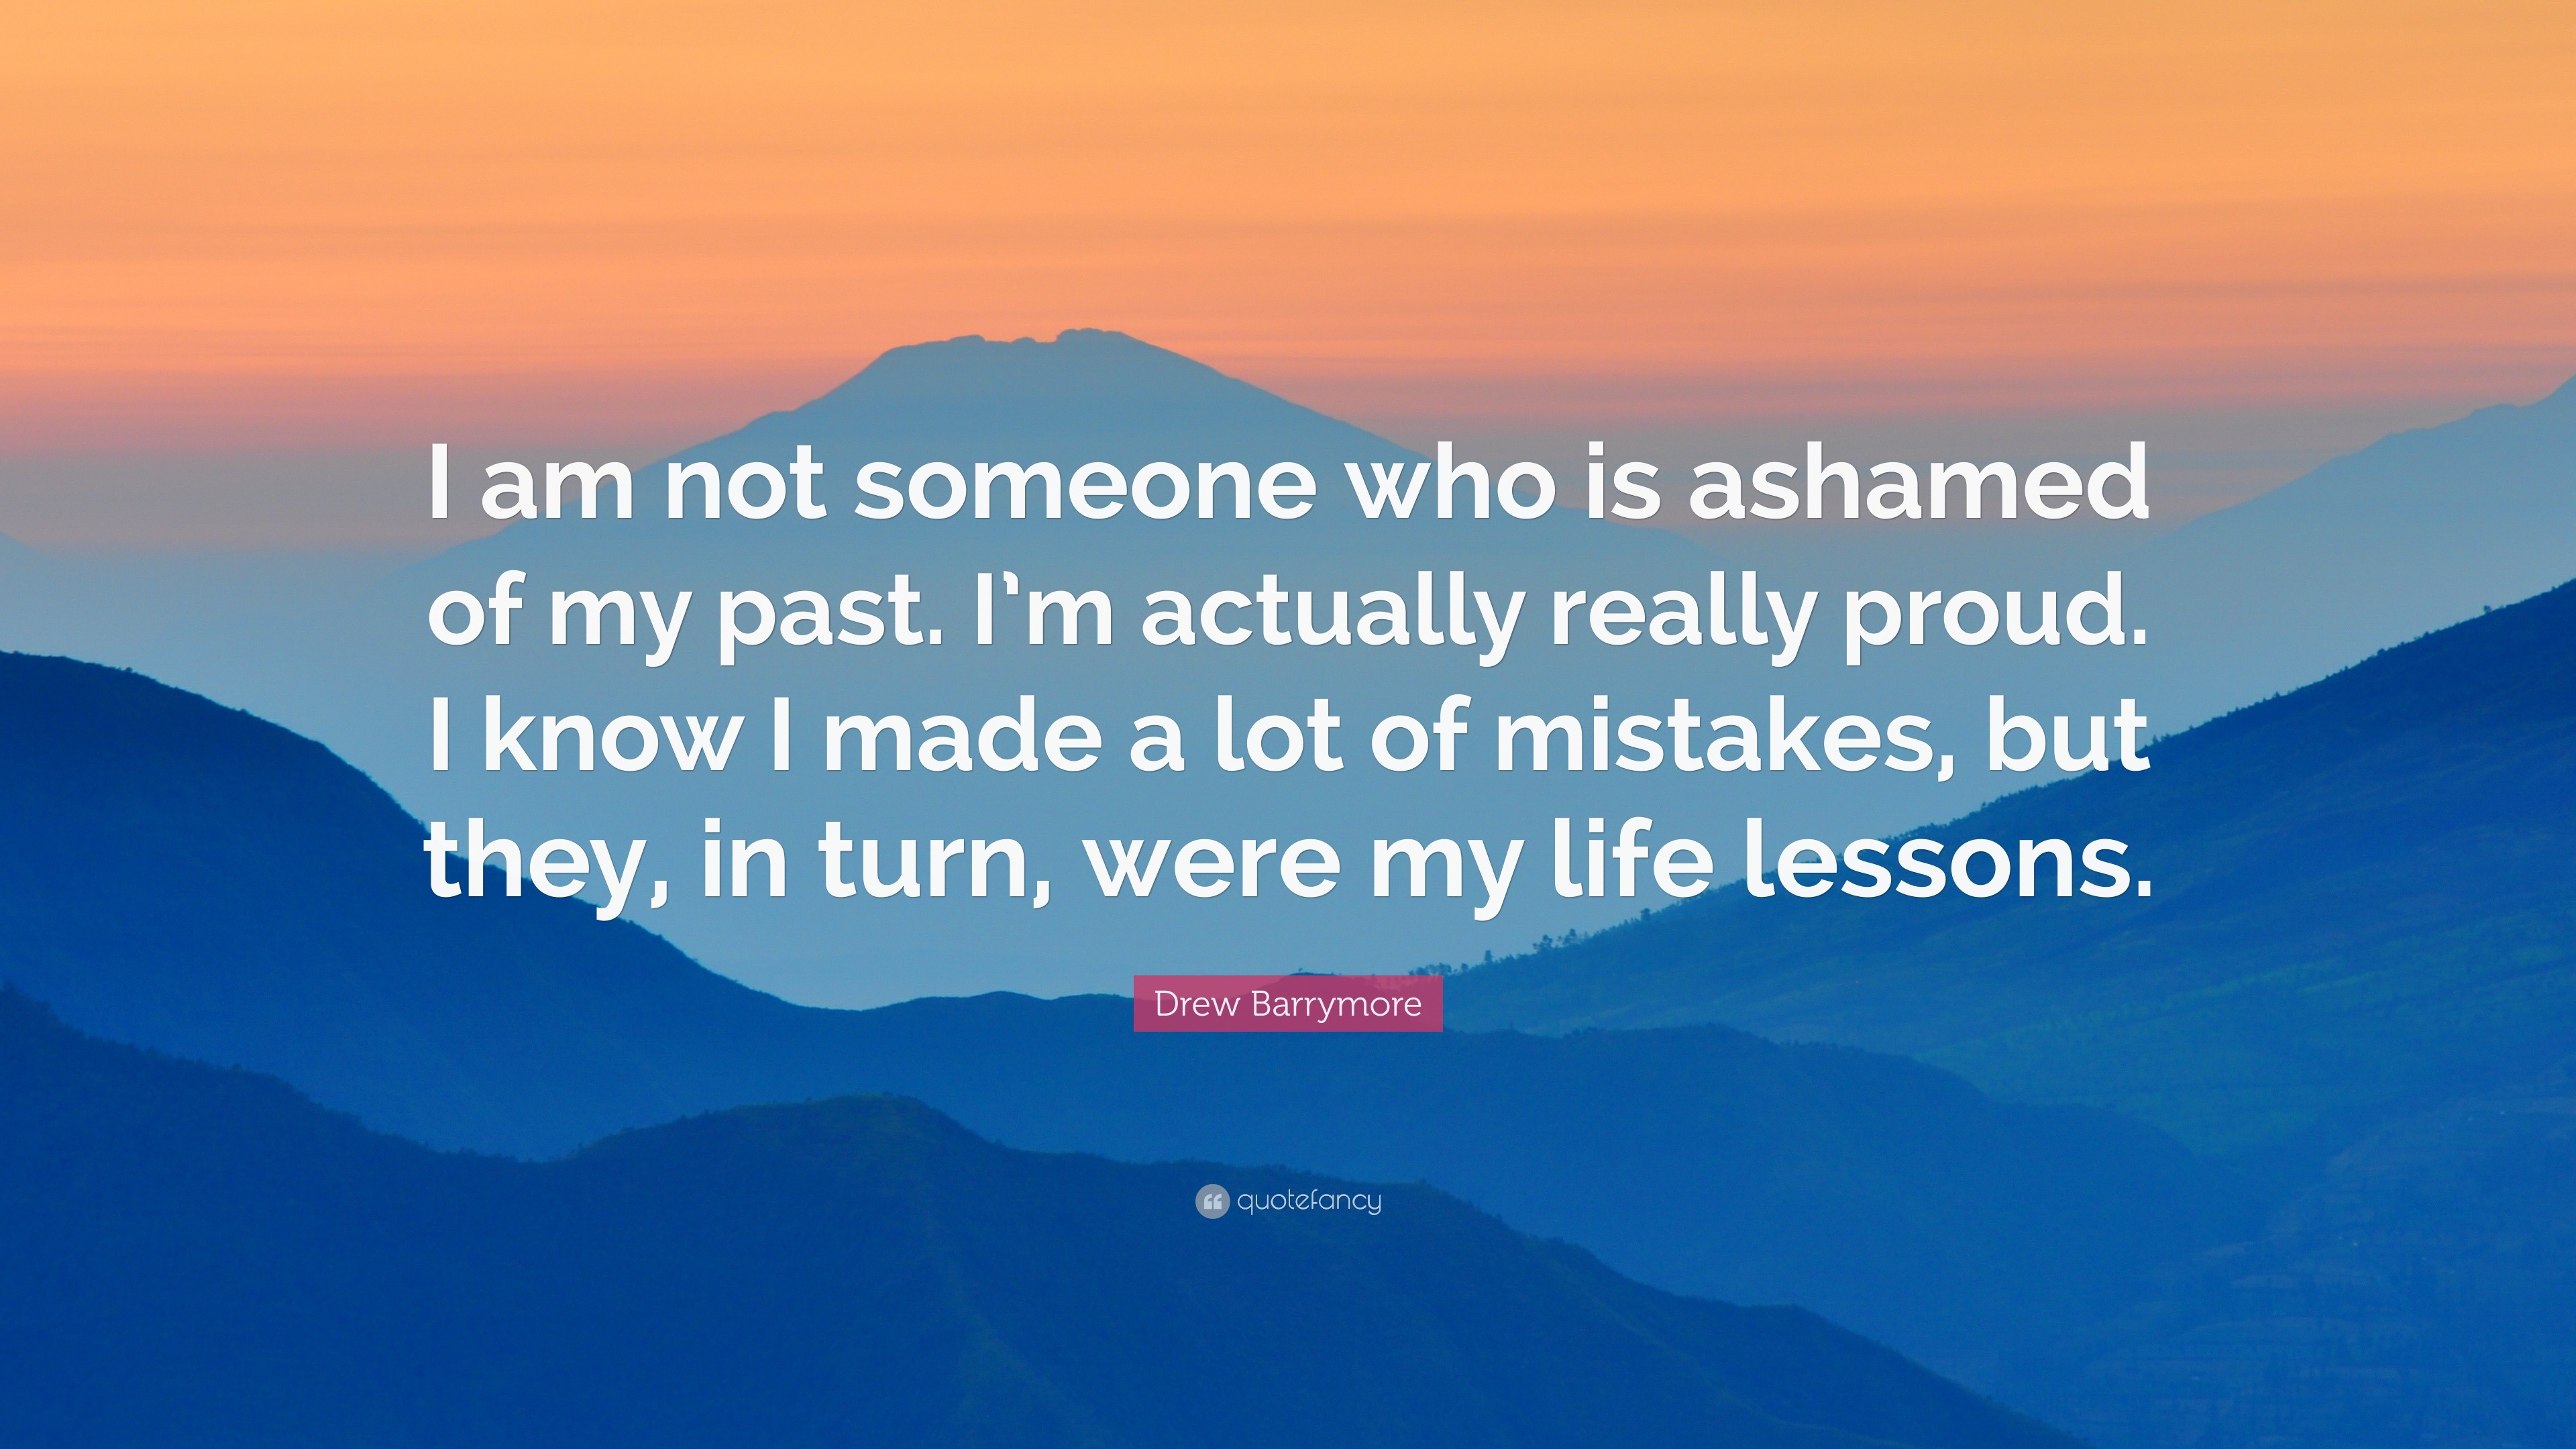 Drew Barrymore Quote “I am not someone who is ashamed of my past